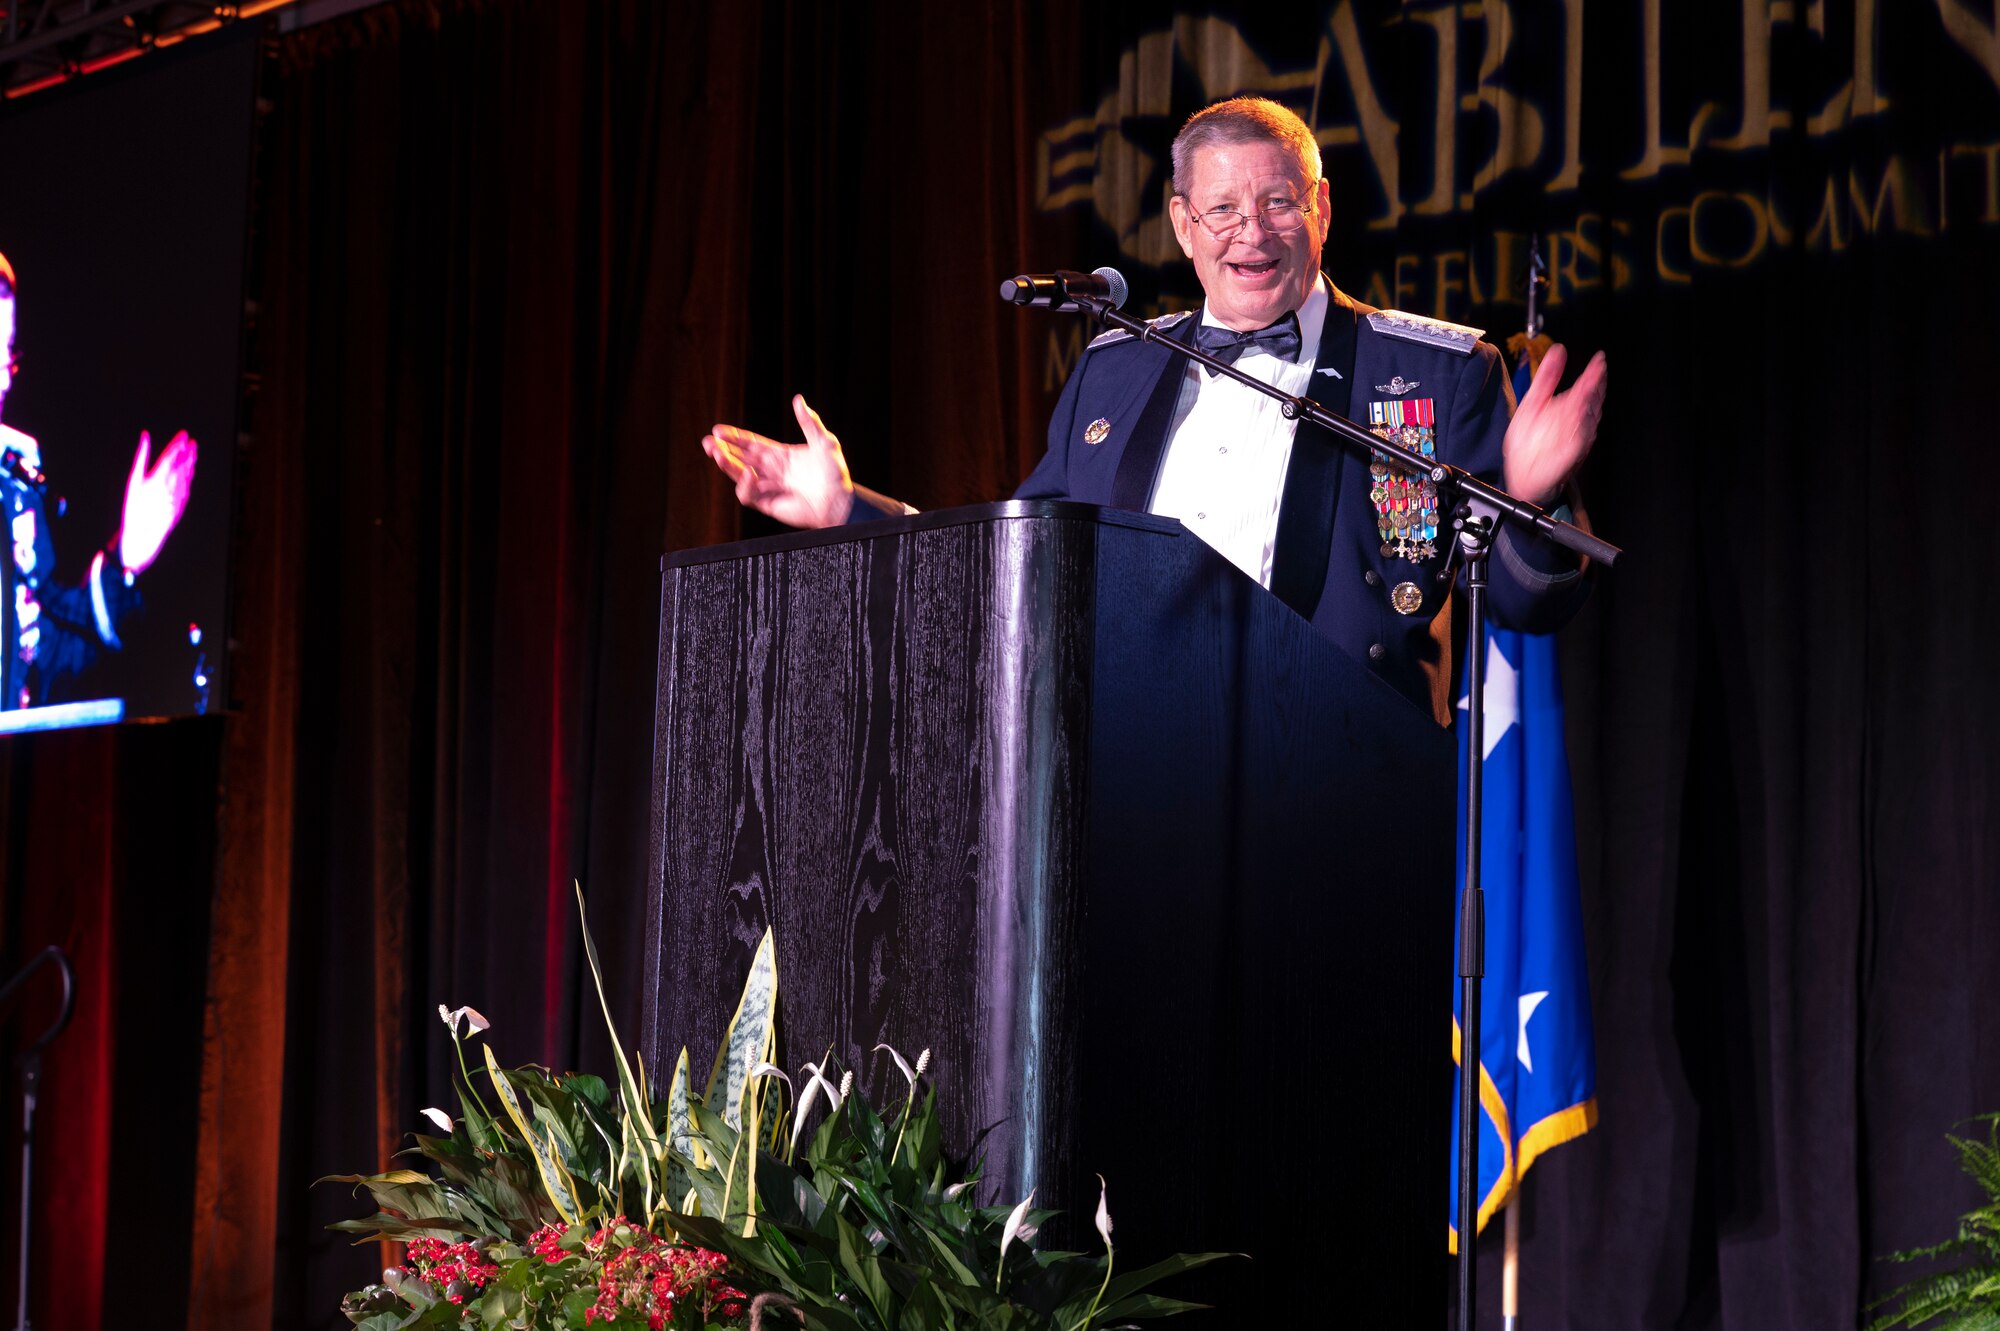 Retired Gen. Robin Rand, former Air Force Global Strike Command and Air Forces Strategic Air, U.S. Strategic Command, commander, delivers the keynote address at the Abilene Military Affairs Committee and Dyess Air Force Gala in Abilene, Texas, Aug. 26, 2023. The event was held to celebrate the MAC’s 70th anniversary and the  Air Force’s 76th birthday. The Abilene MAC hosted the gala to honor Dyess Airmen and the legacy they have created at America’s only Lift and Strike Base.